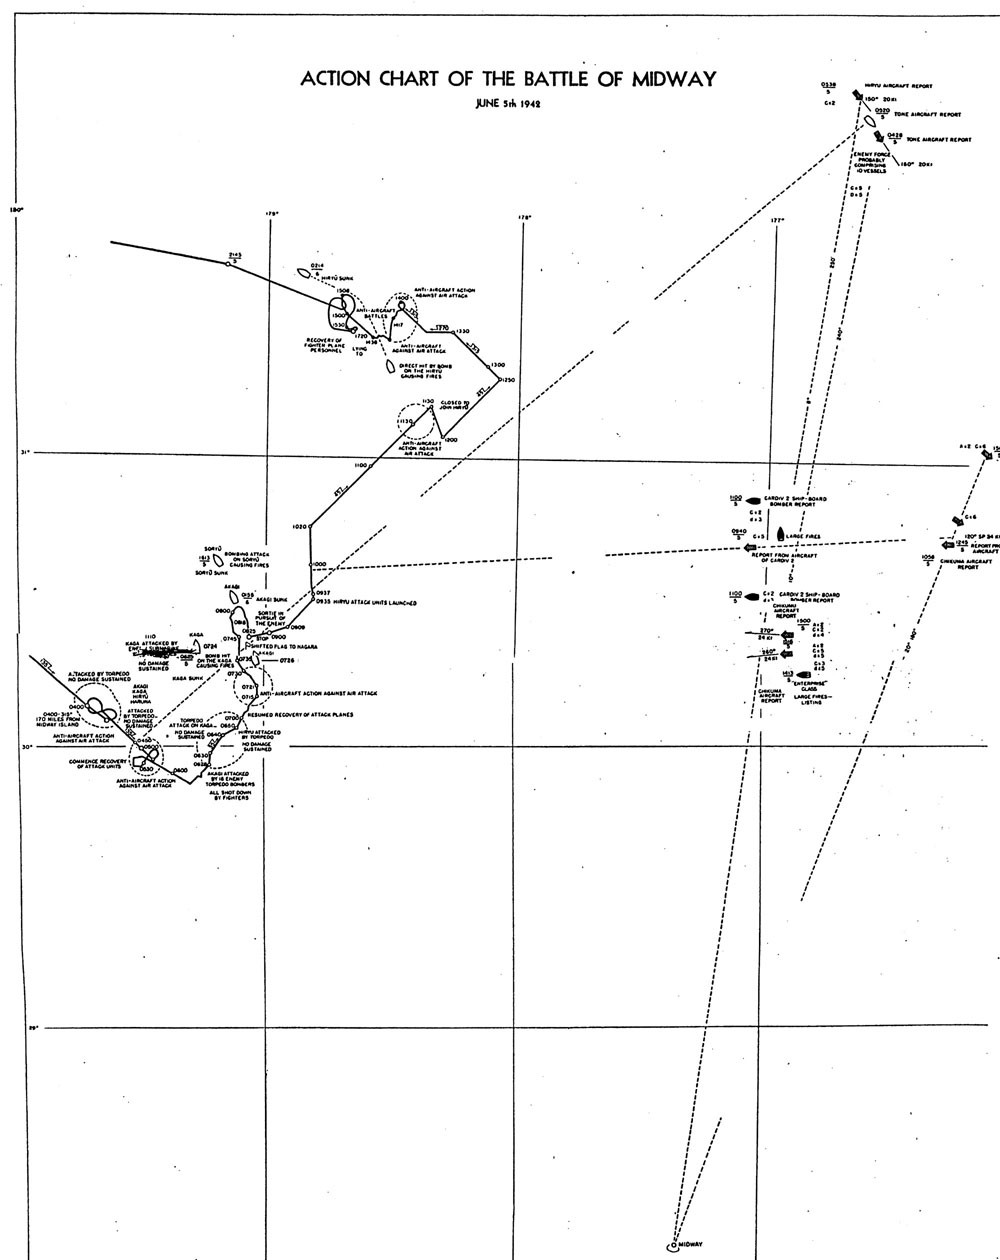 Image of Action Chart of the Battle of Midway, June 5th, 1942